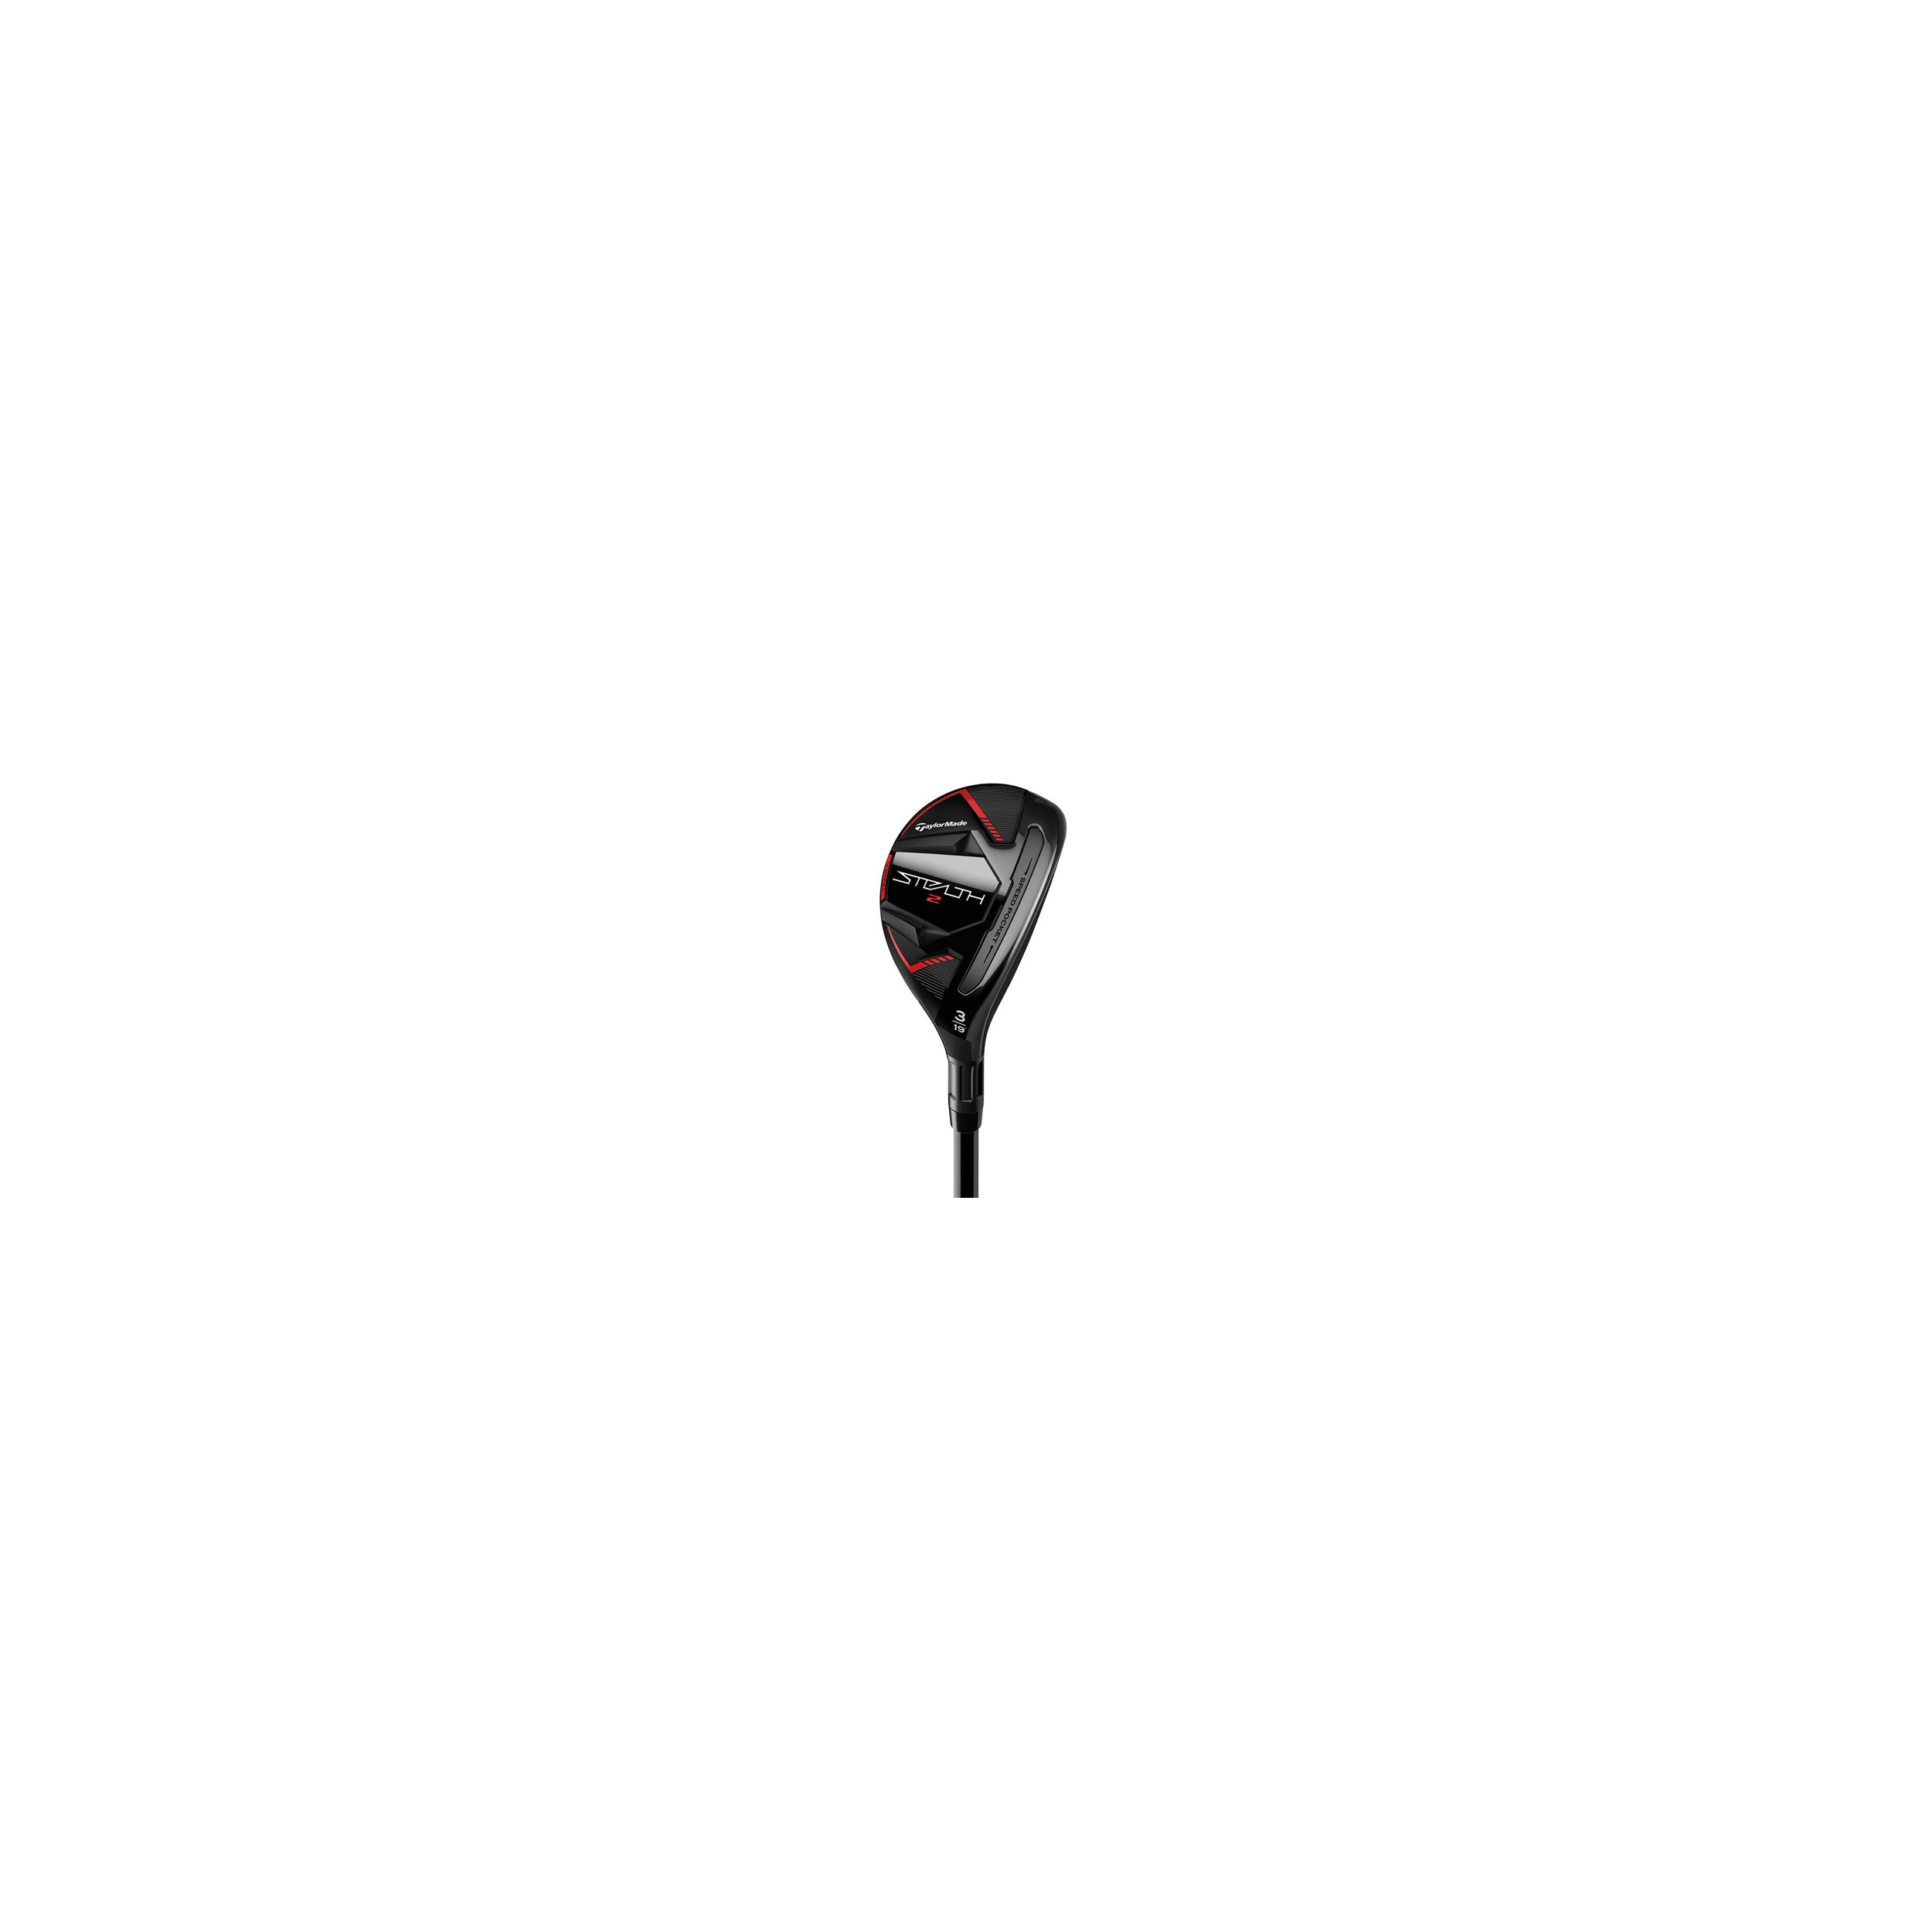 HIBRIDO TAYLORMADE STEALTH 2 5H